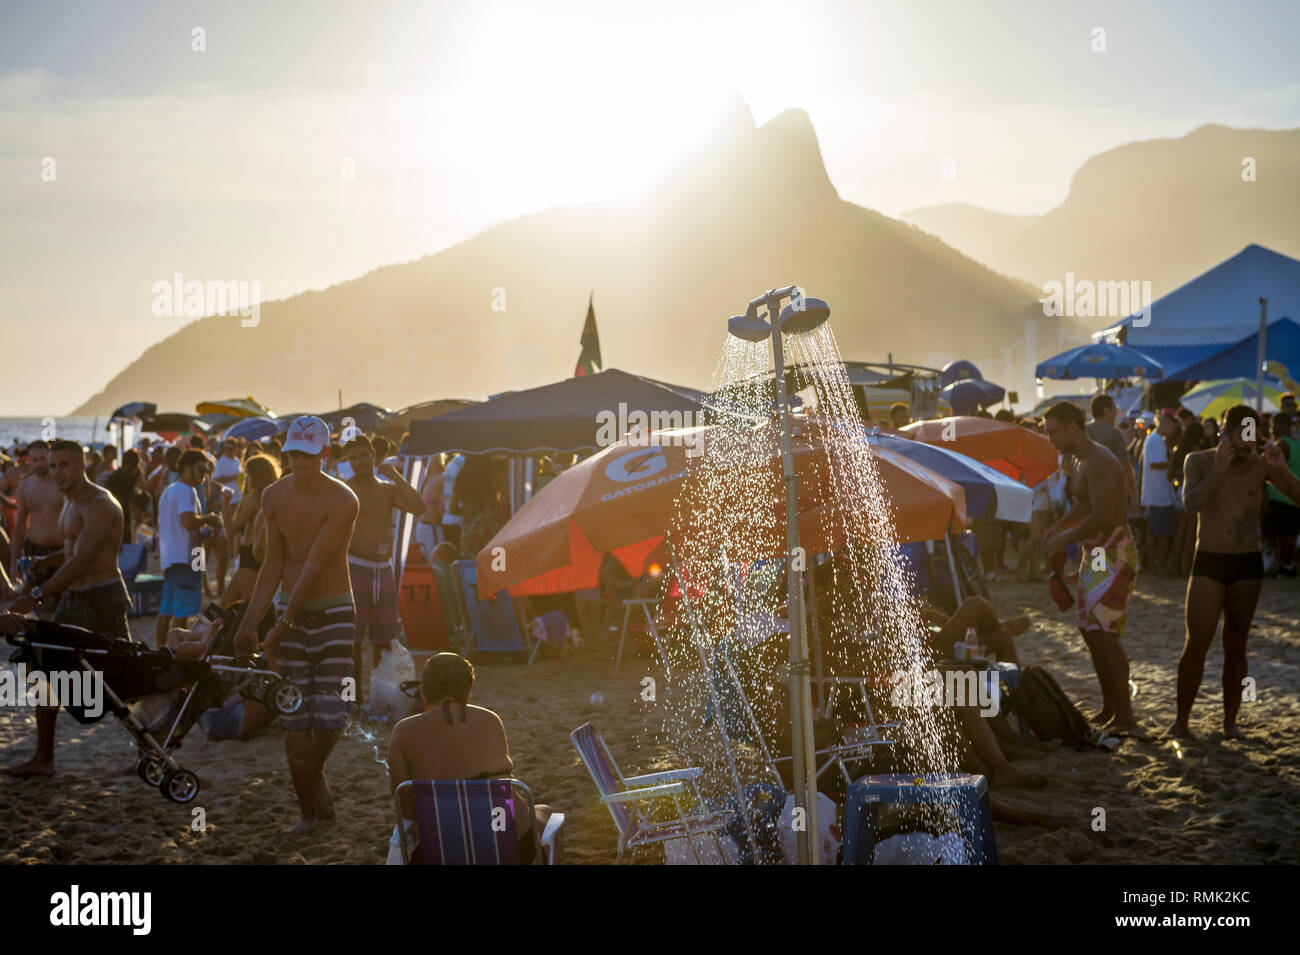 RIO DE JANEIRO - FEBRUARY 08, 2015: Showers stand ready to rinse the crowds leaving after the sun sets on a busy summer afternoon on Ipanema Beach. Stock Photo